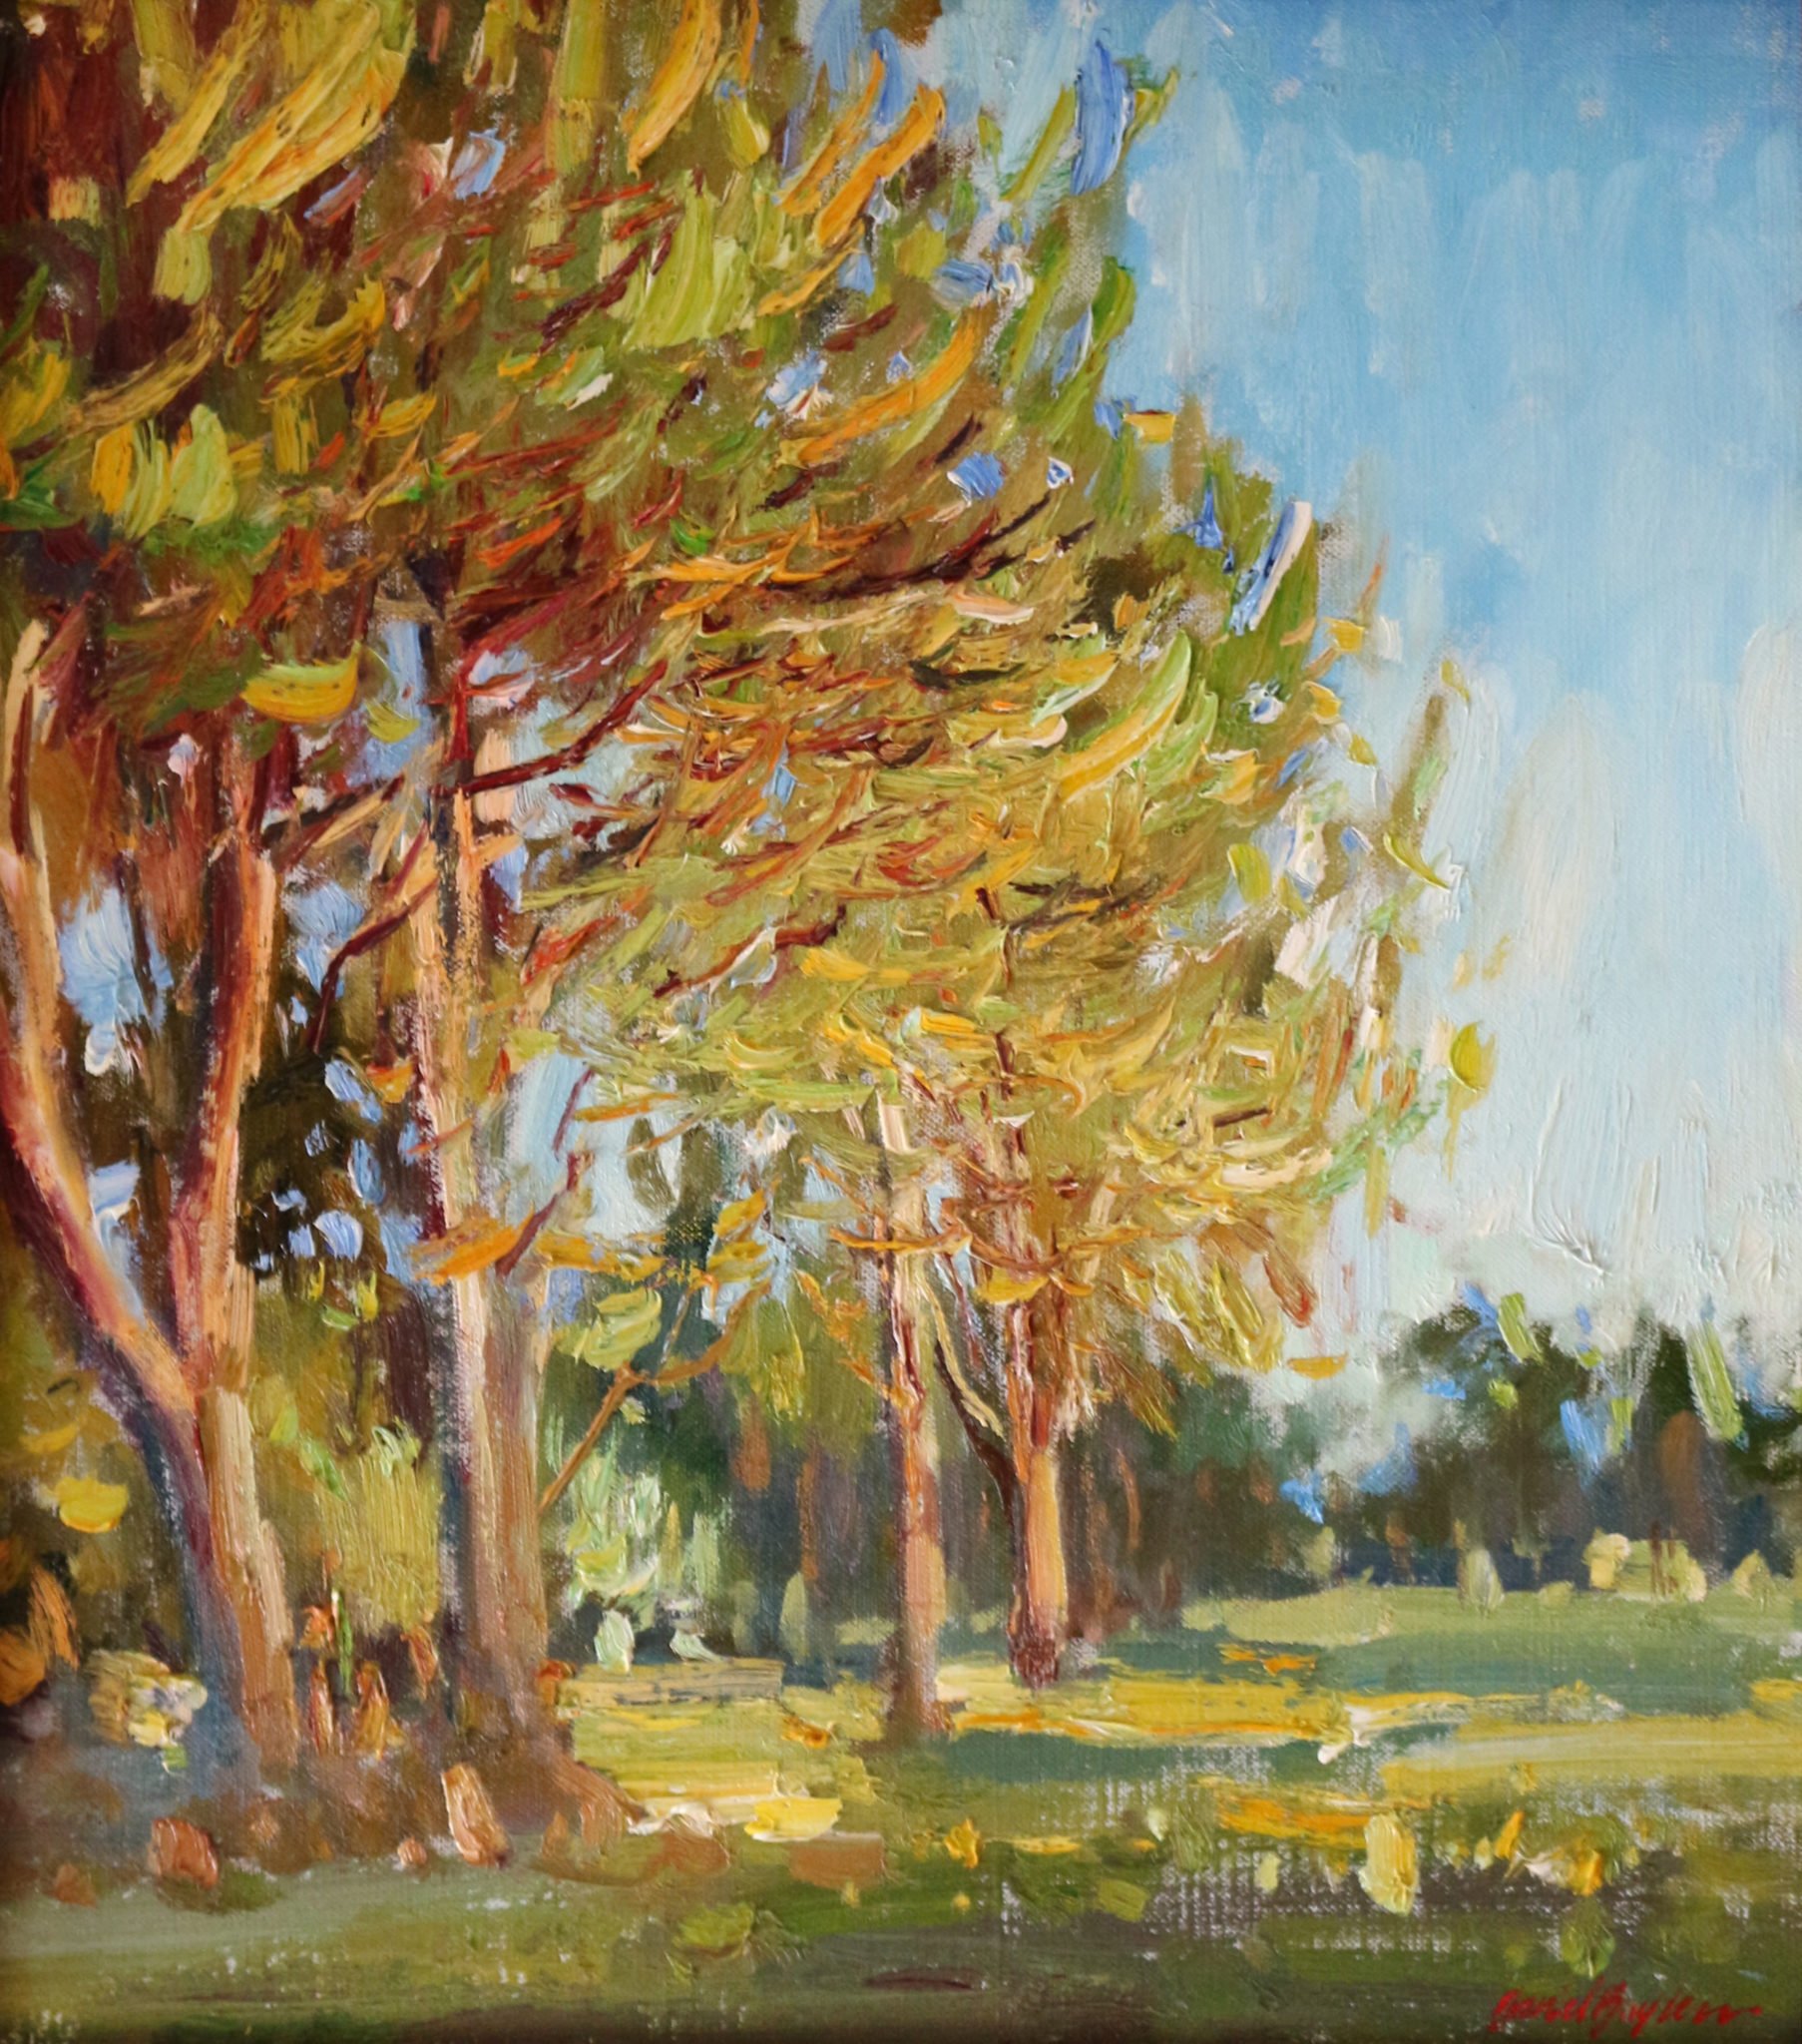 Oil on canvas painting of the evening sun illuminating the trees of Paso Robles by Daniel Bayless